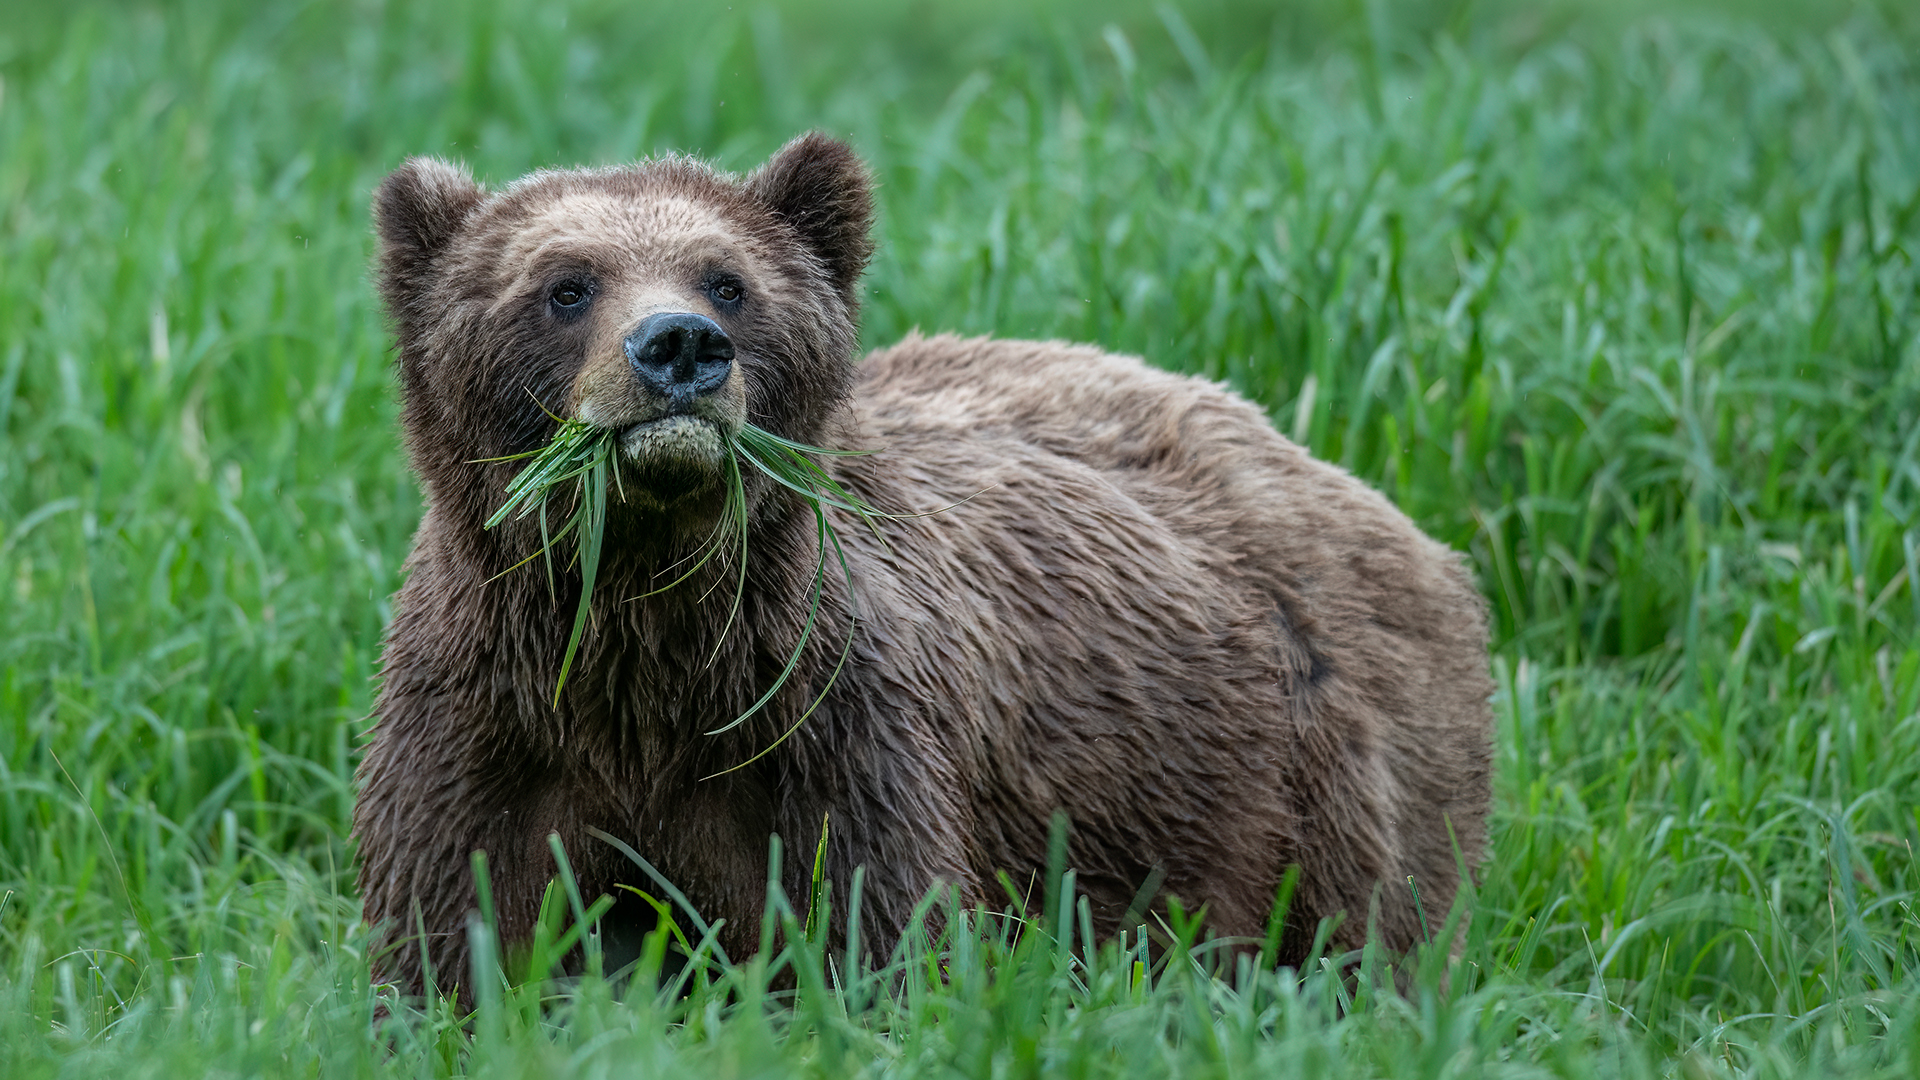 This bear, munching on Lyngby’s sedge—an important springtime food, displays a uniform brown color, but the ears are slightly pointy and asymmetrical.